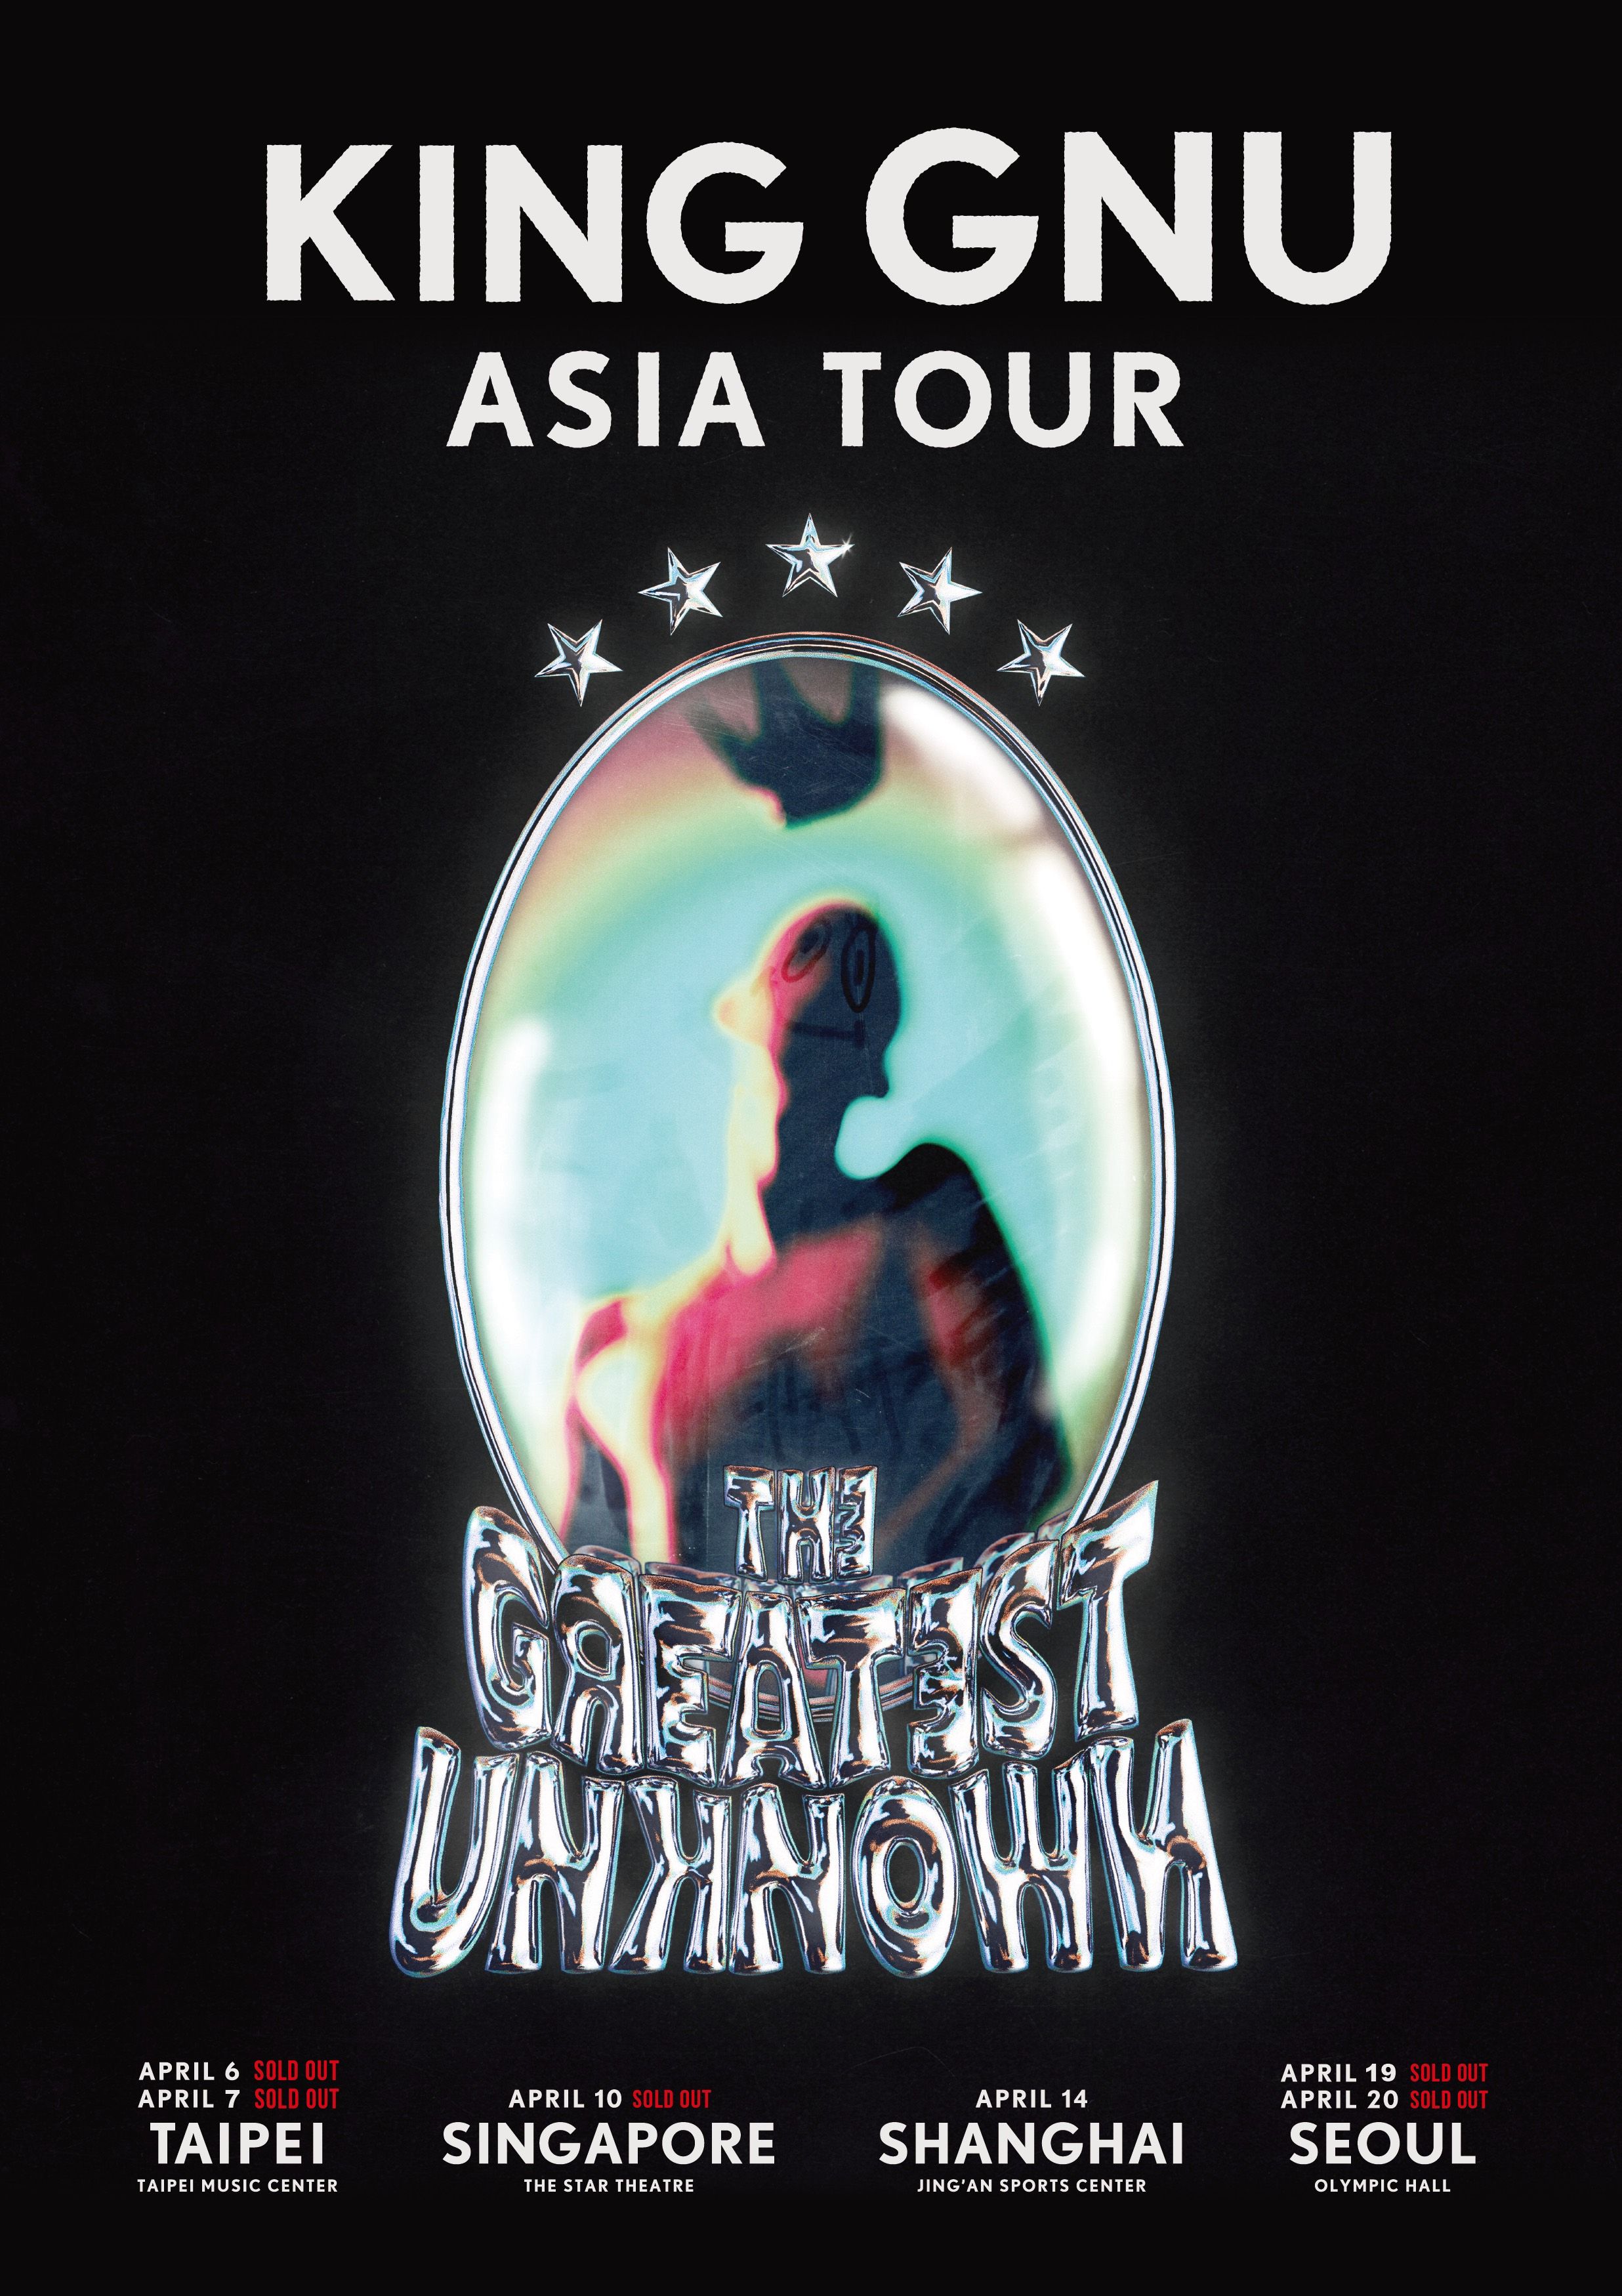 “King Gnu Asia Tour 「THE GREATEST UNKNOWN」“、4月14日 